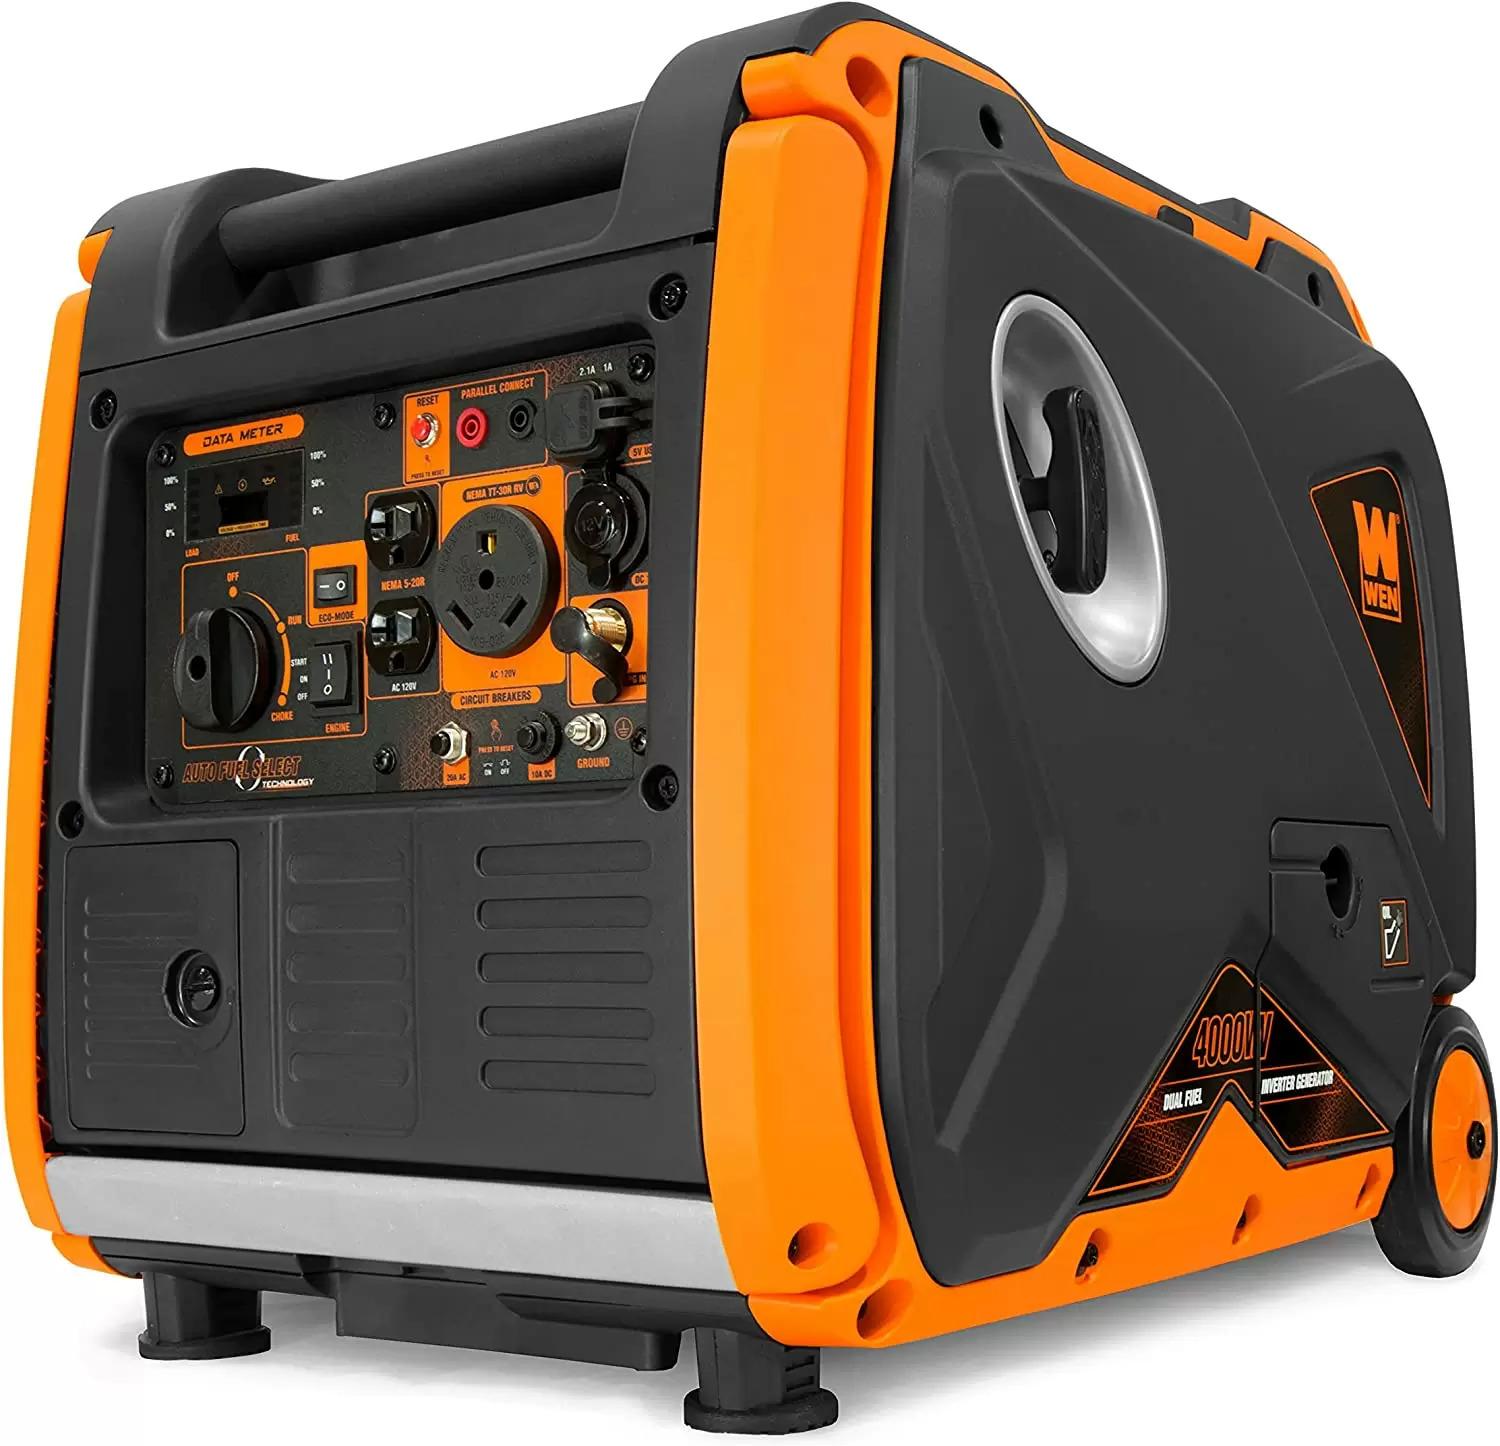 WEN DF400i 4000W Dual Fuel Electric Start Inverter Generator for $659 Shipped